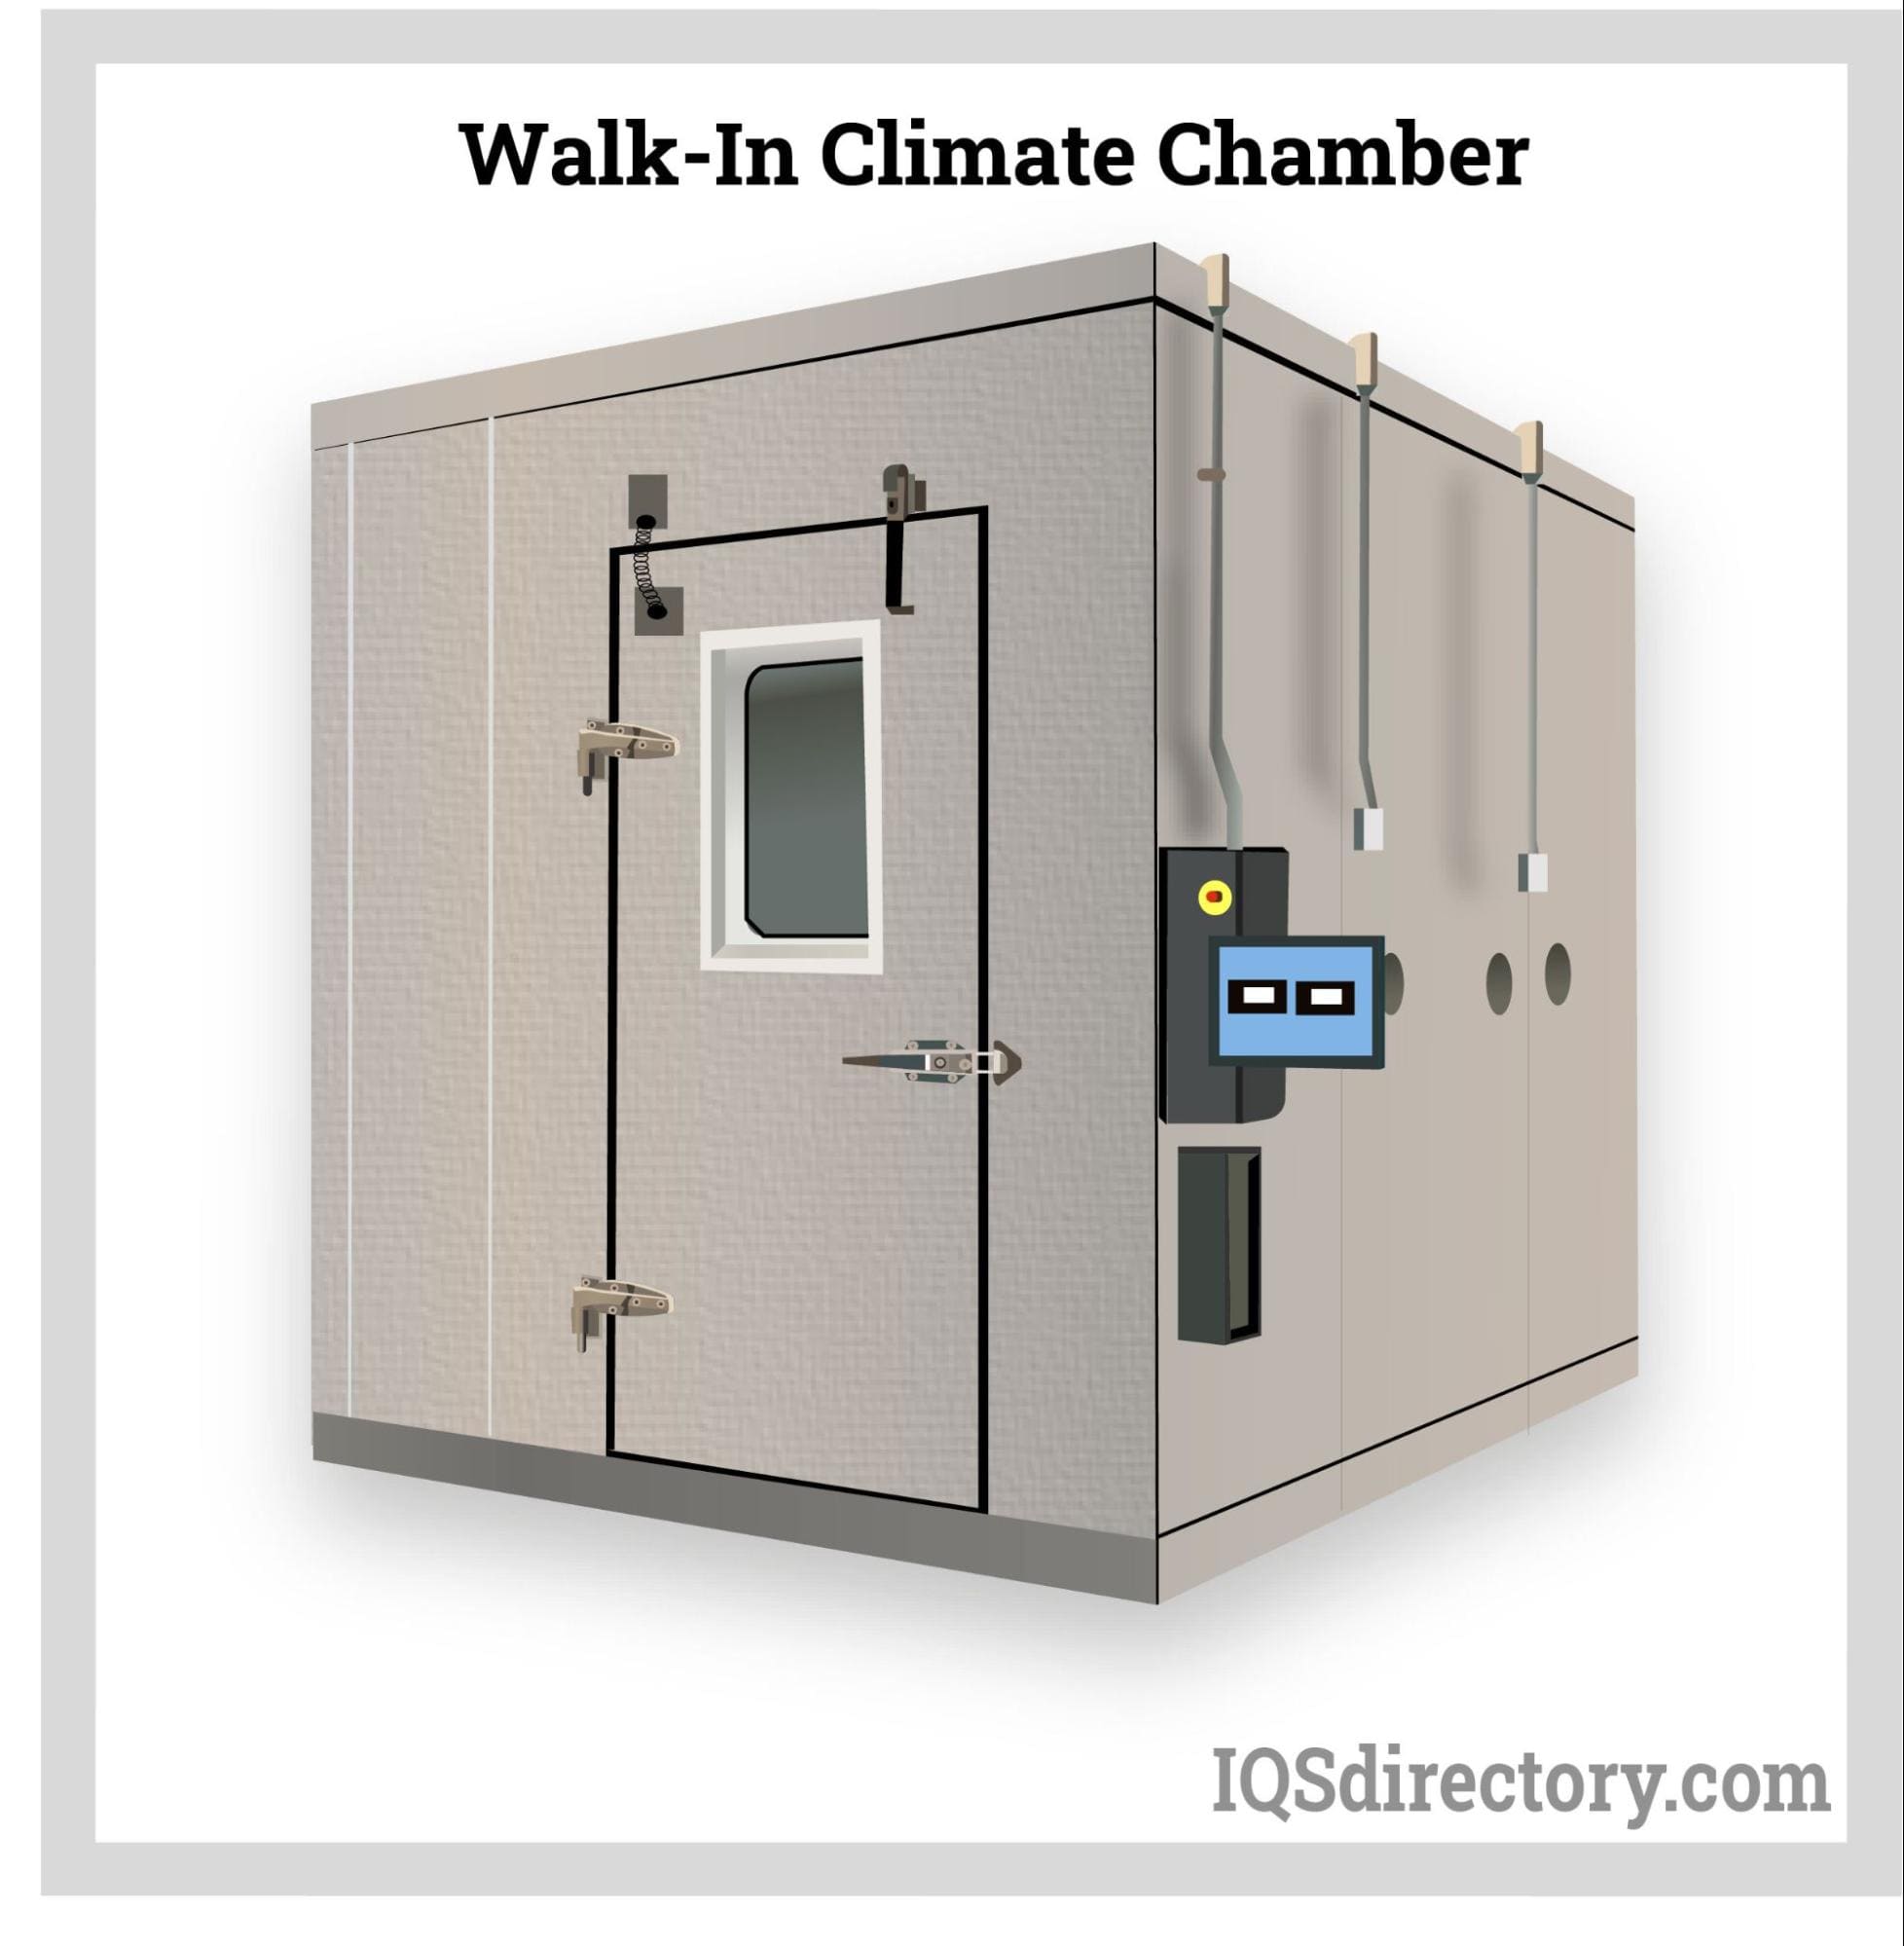 Walk-In Climate Chamber